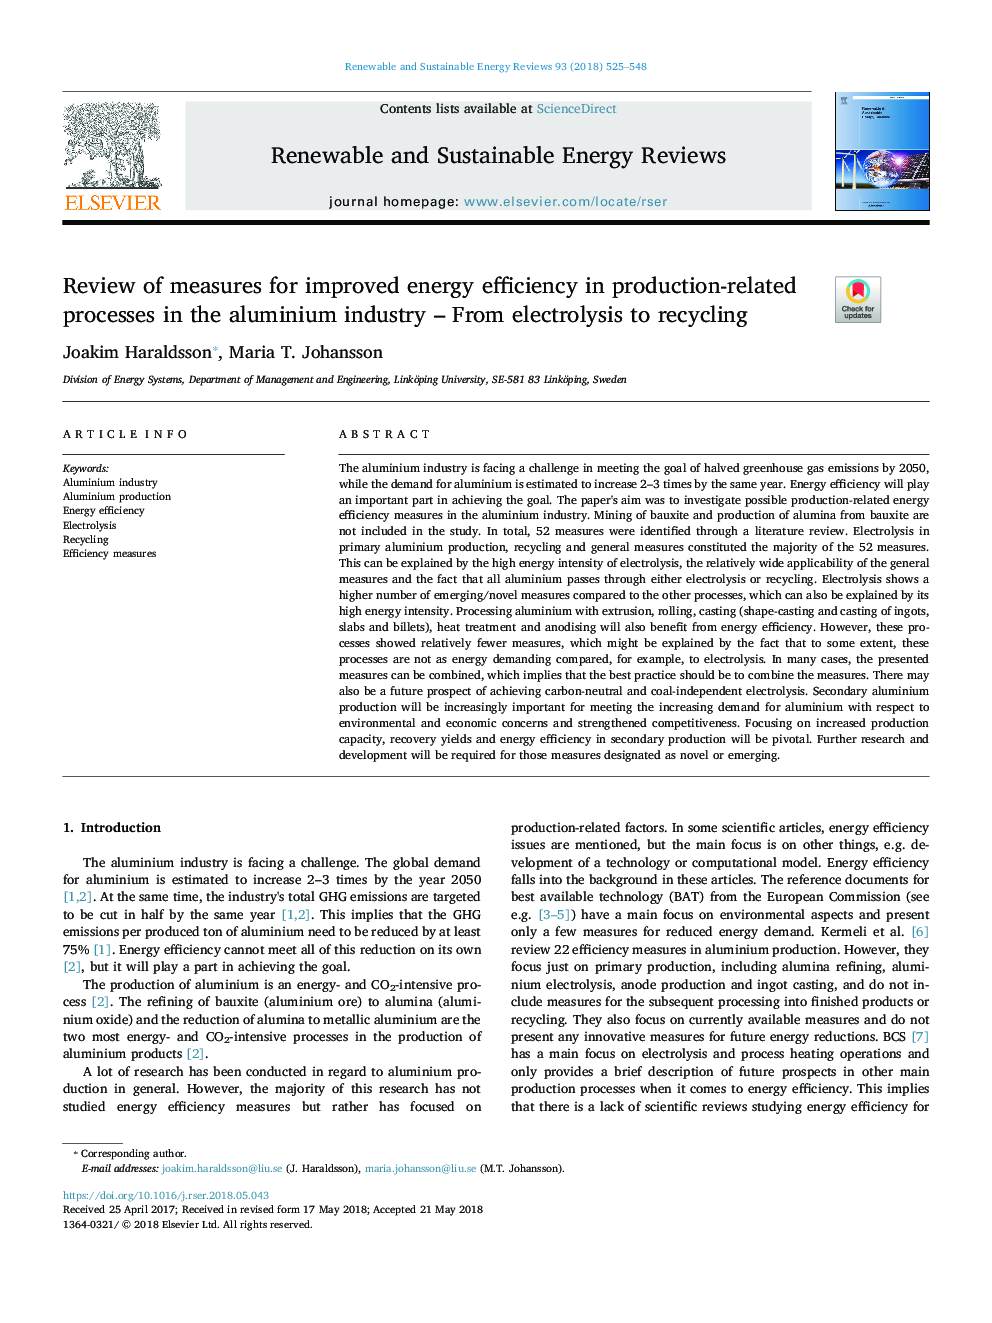 Review of measures for improved energy efficiency in production-related processes in the aluminium industry - From electrolysis to recycling